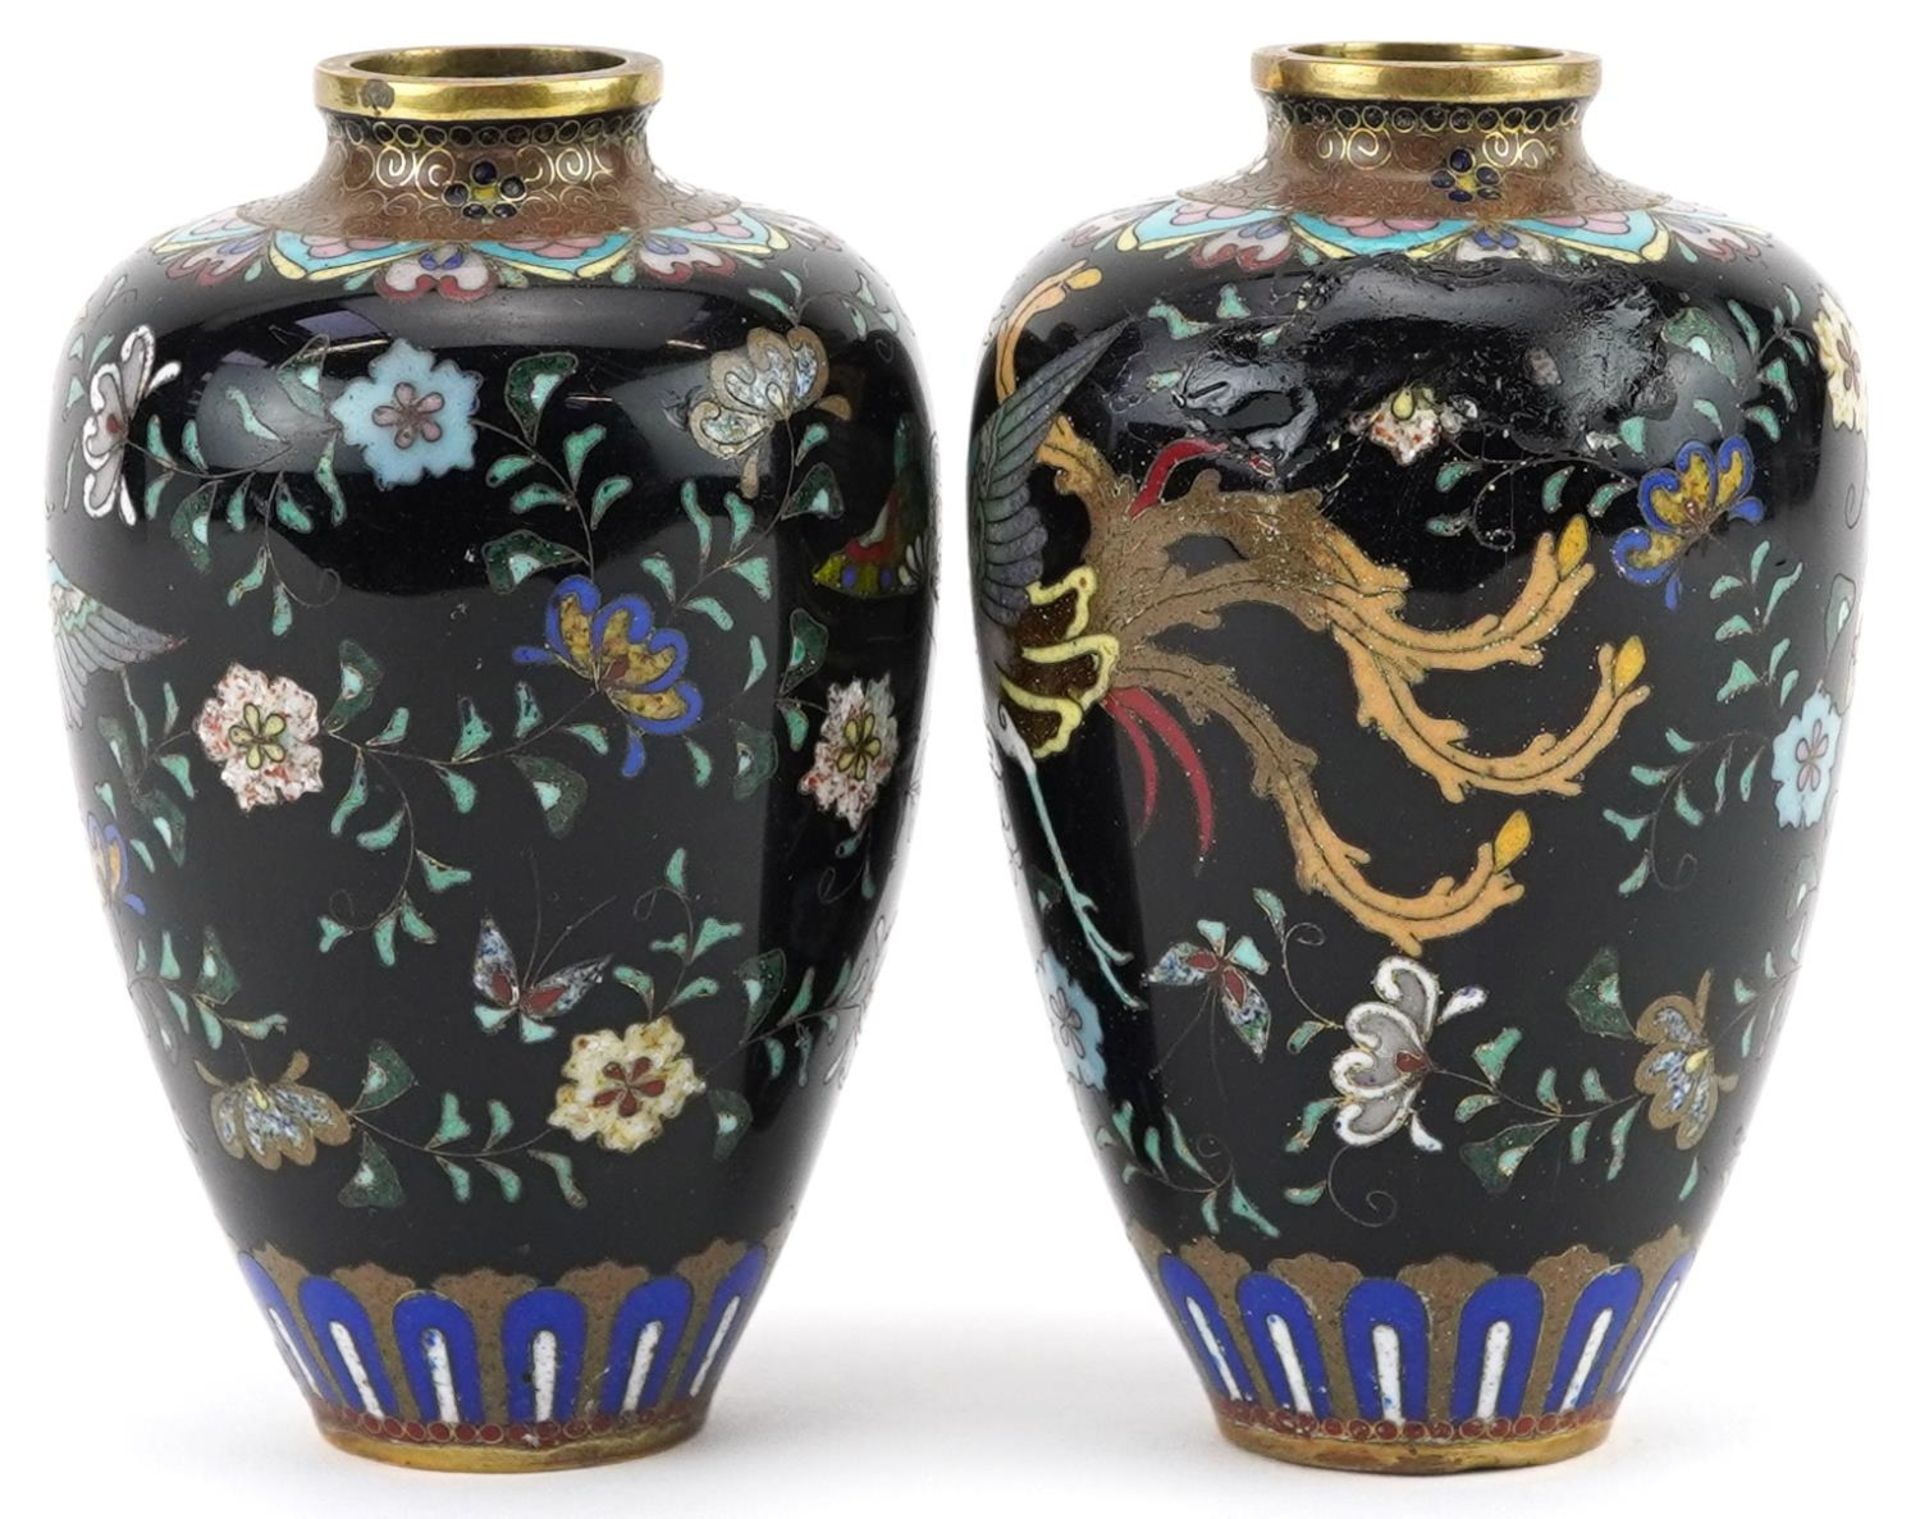 Pair of Japanese cloisonne vases, each enamelled with a mythical bird amongst flowers, each 9cm high - Image 2 of 6